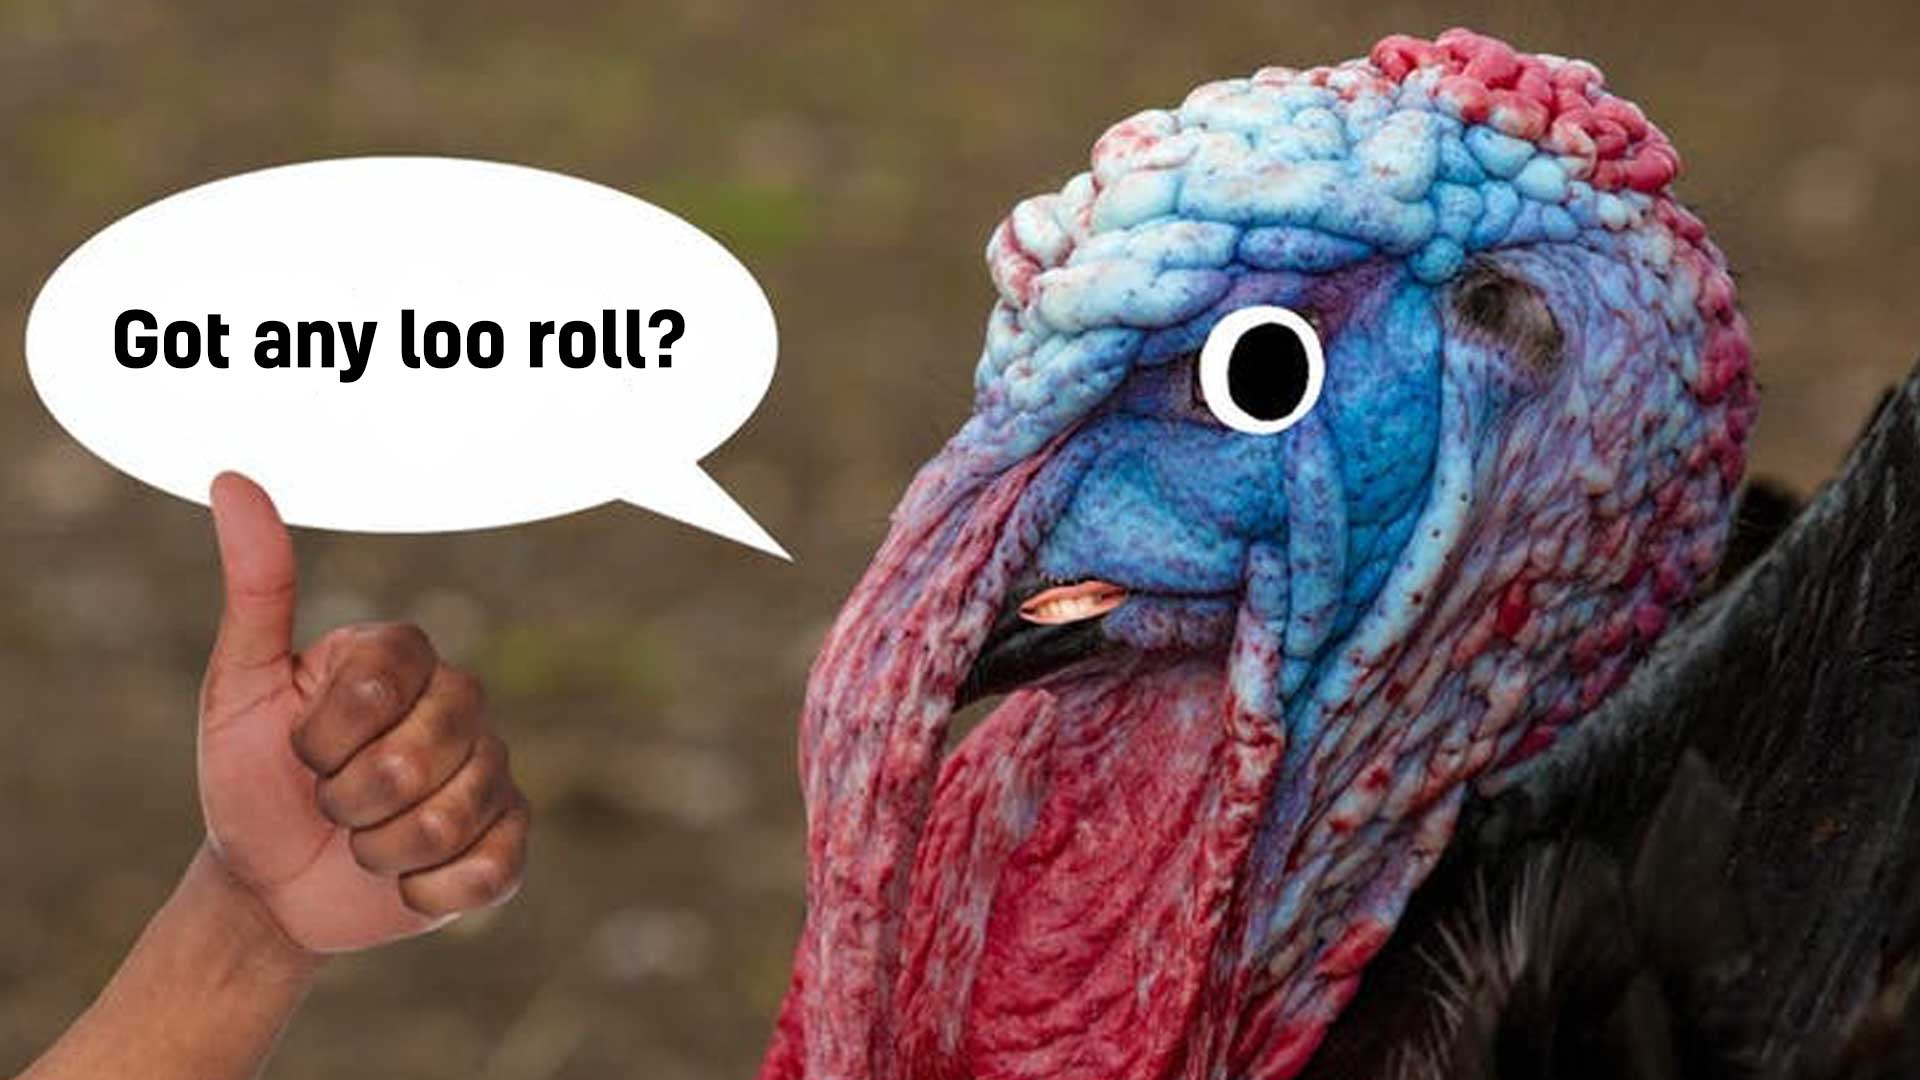 A turkey asking for toilet roll